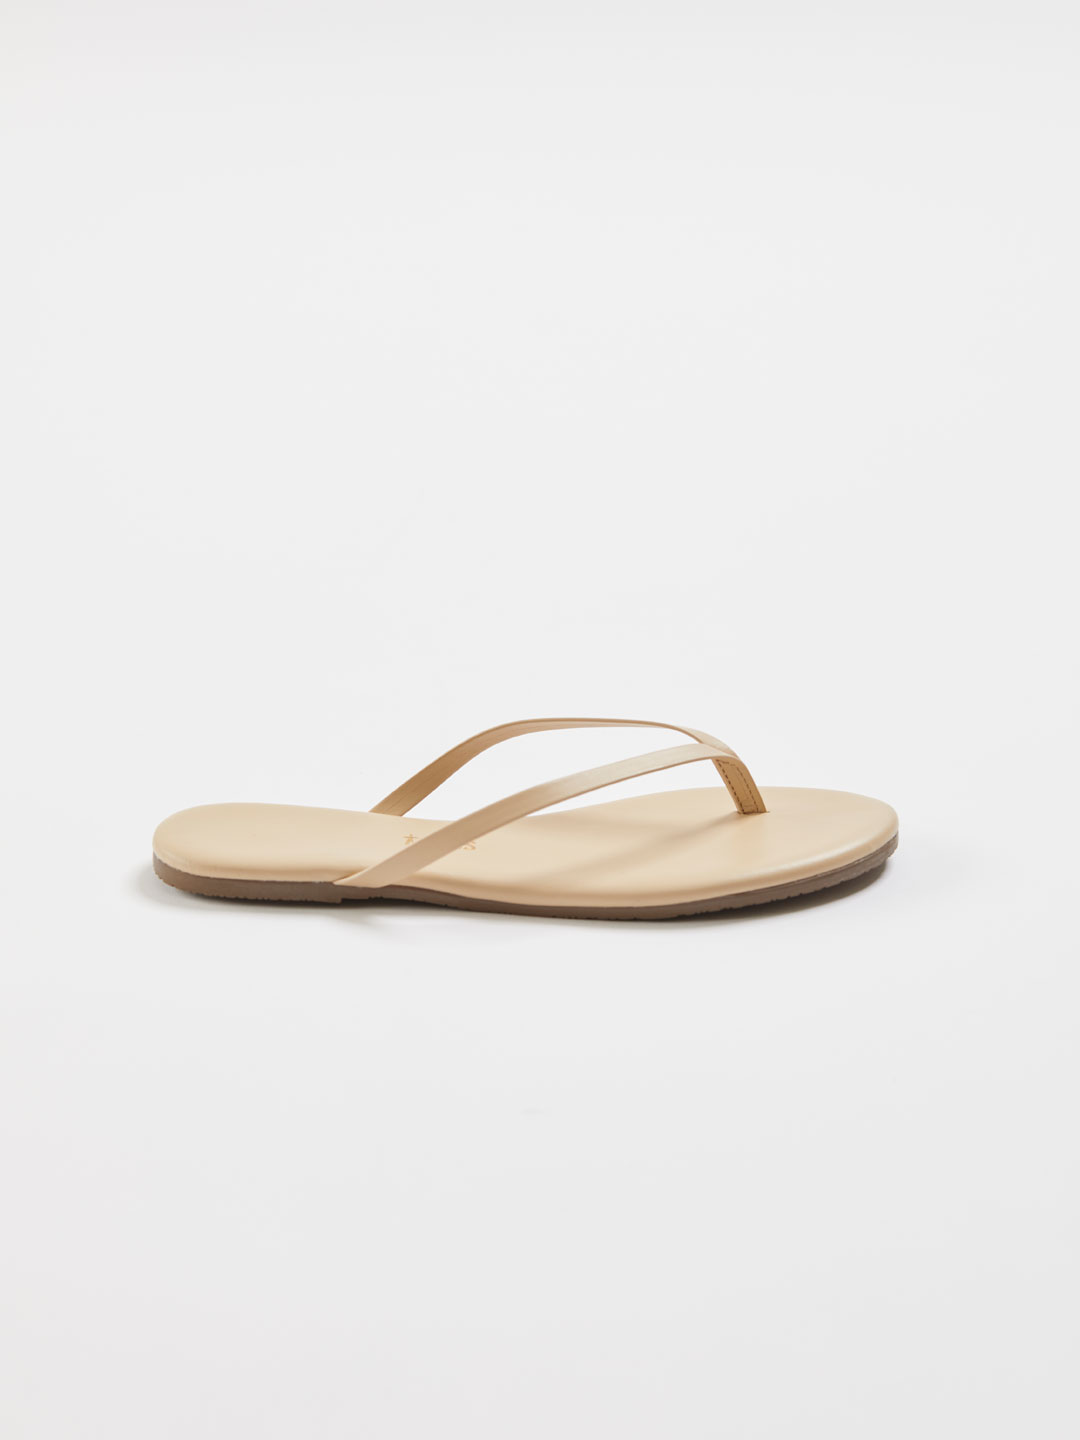 Most Loved Signature Flip Flop Sandals - Seashell/Off White